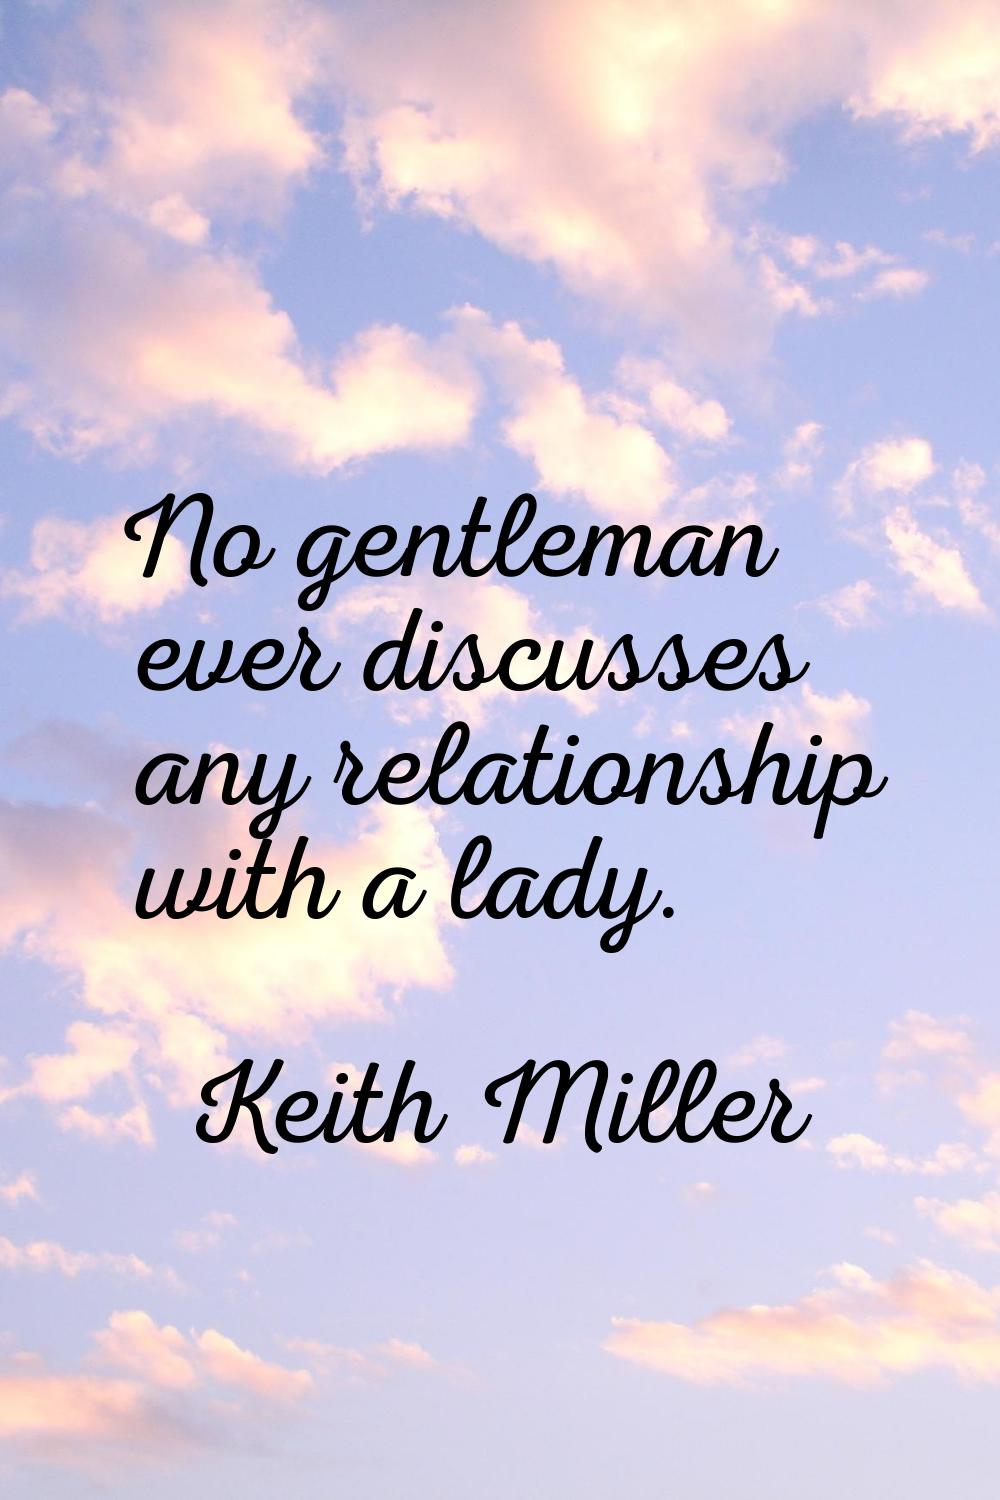 No gentleman ever discusses any relationship with a lady.